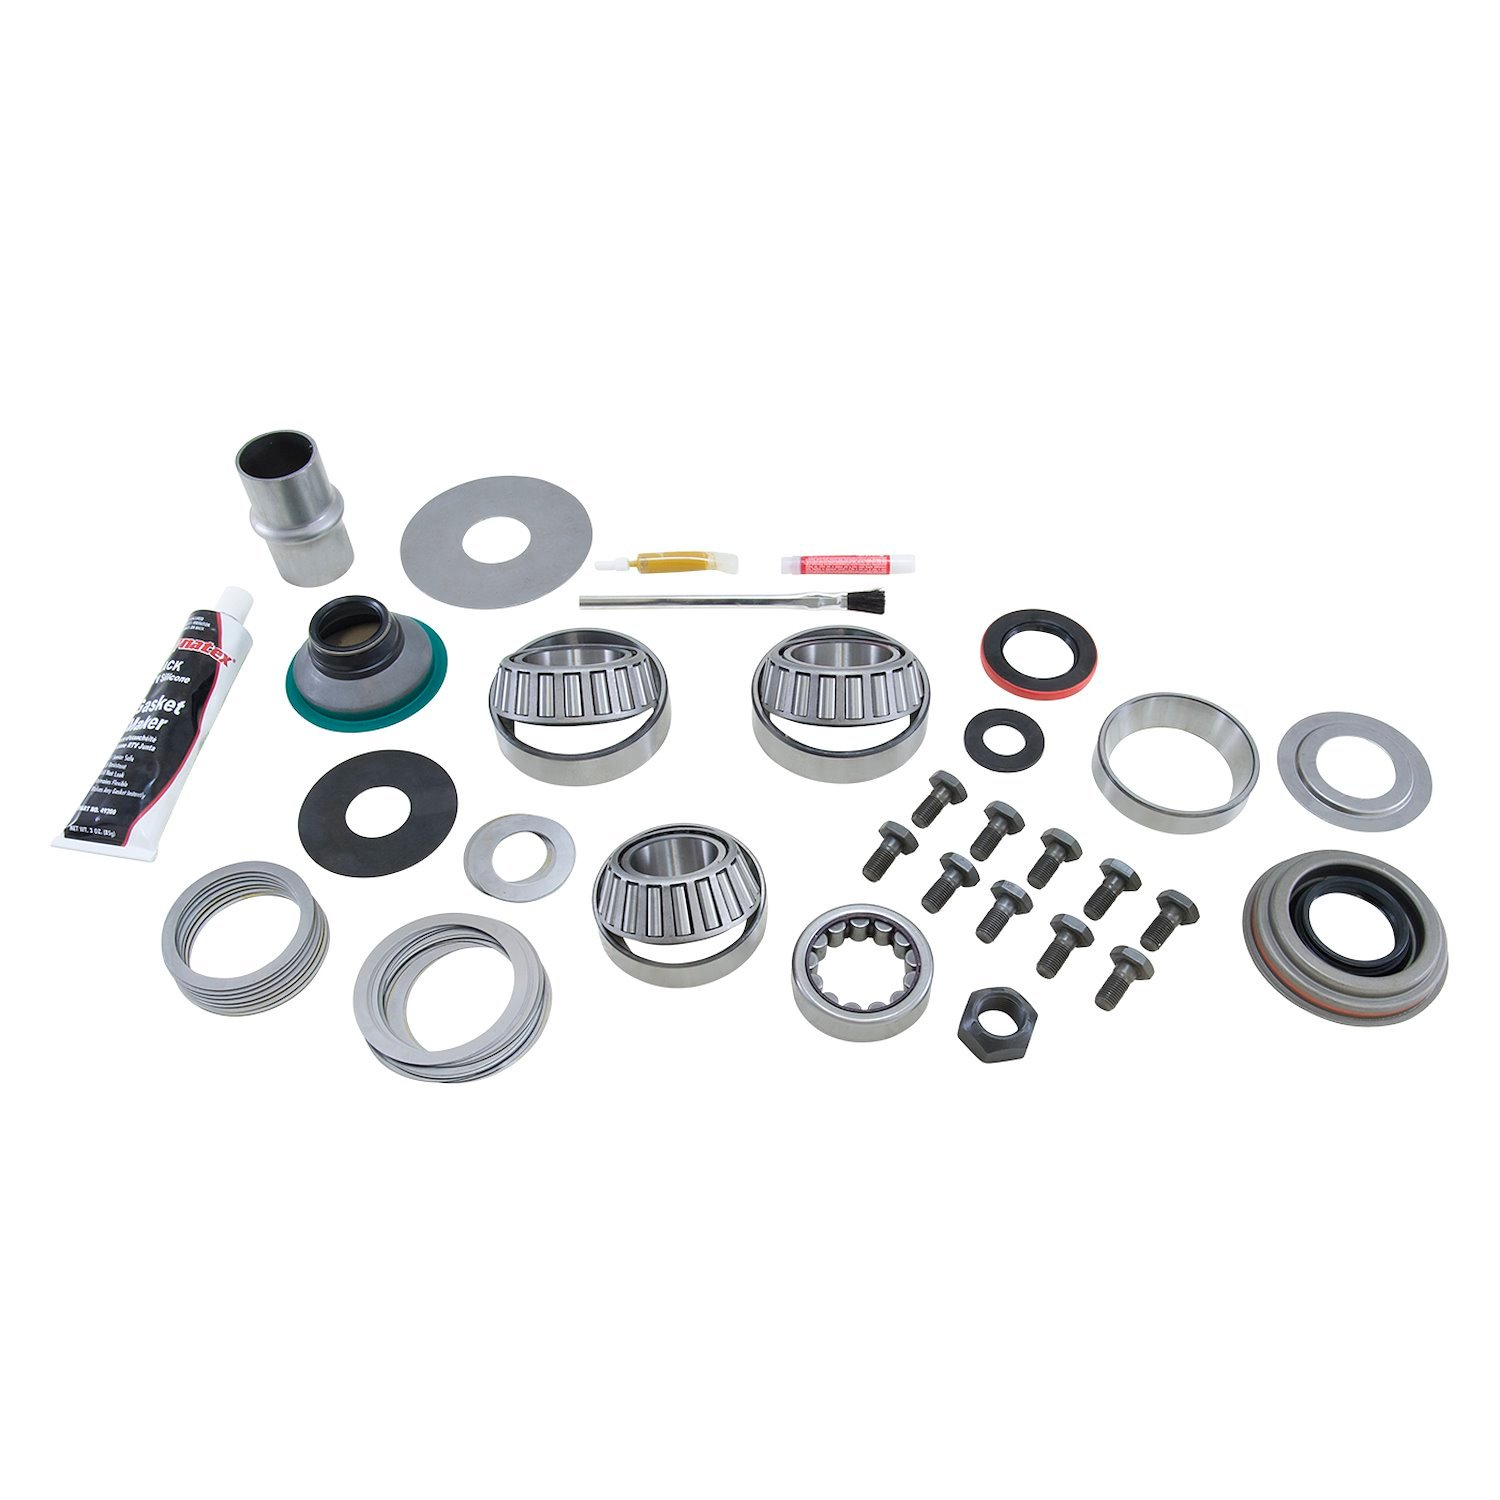 USA Standard ZK D44-IFS-L Master Overhaul Kit, For The '93 & Up Dana 44 Ifs Front Differential